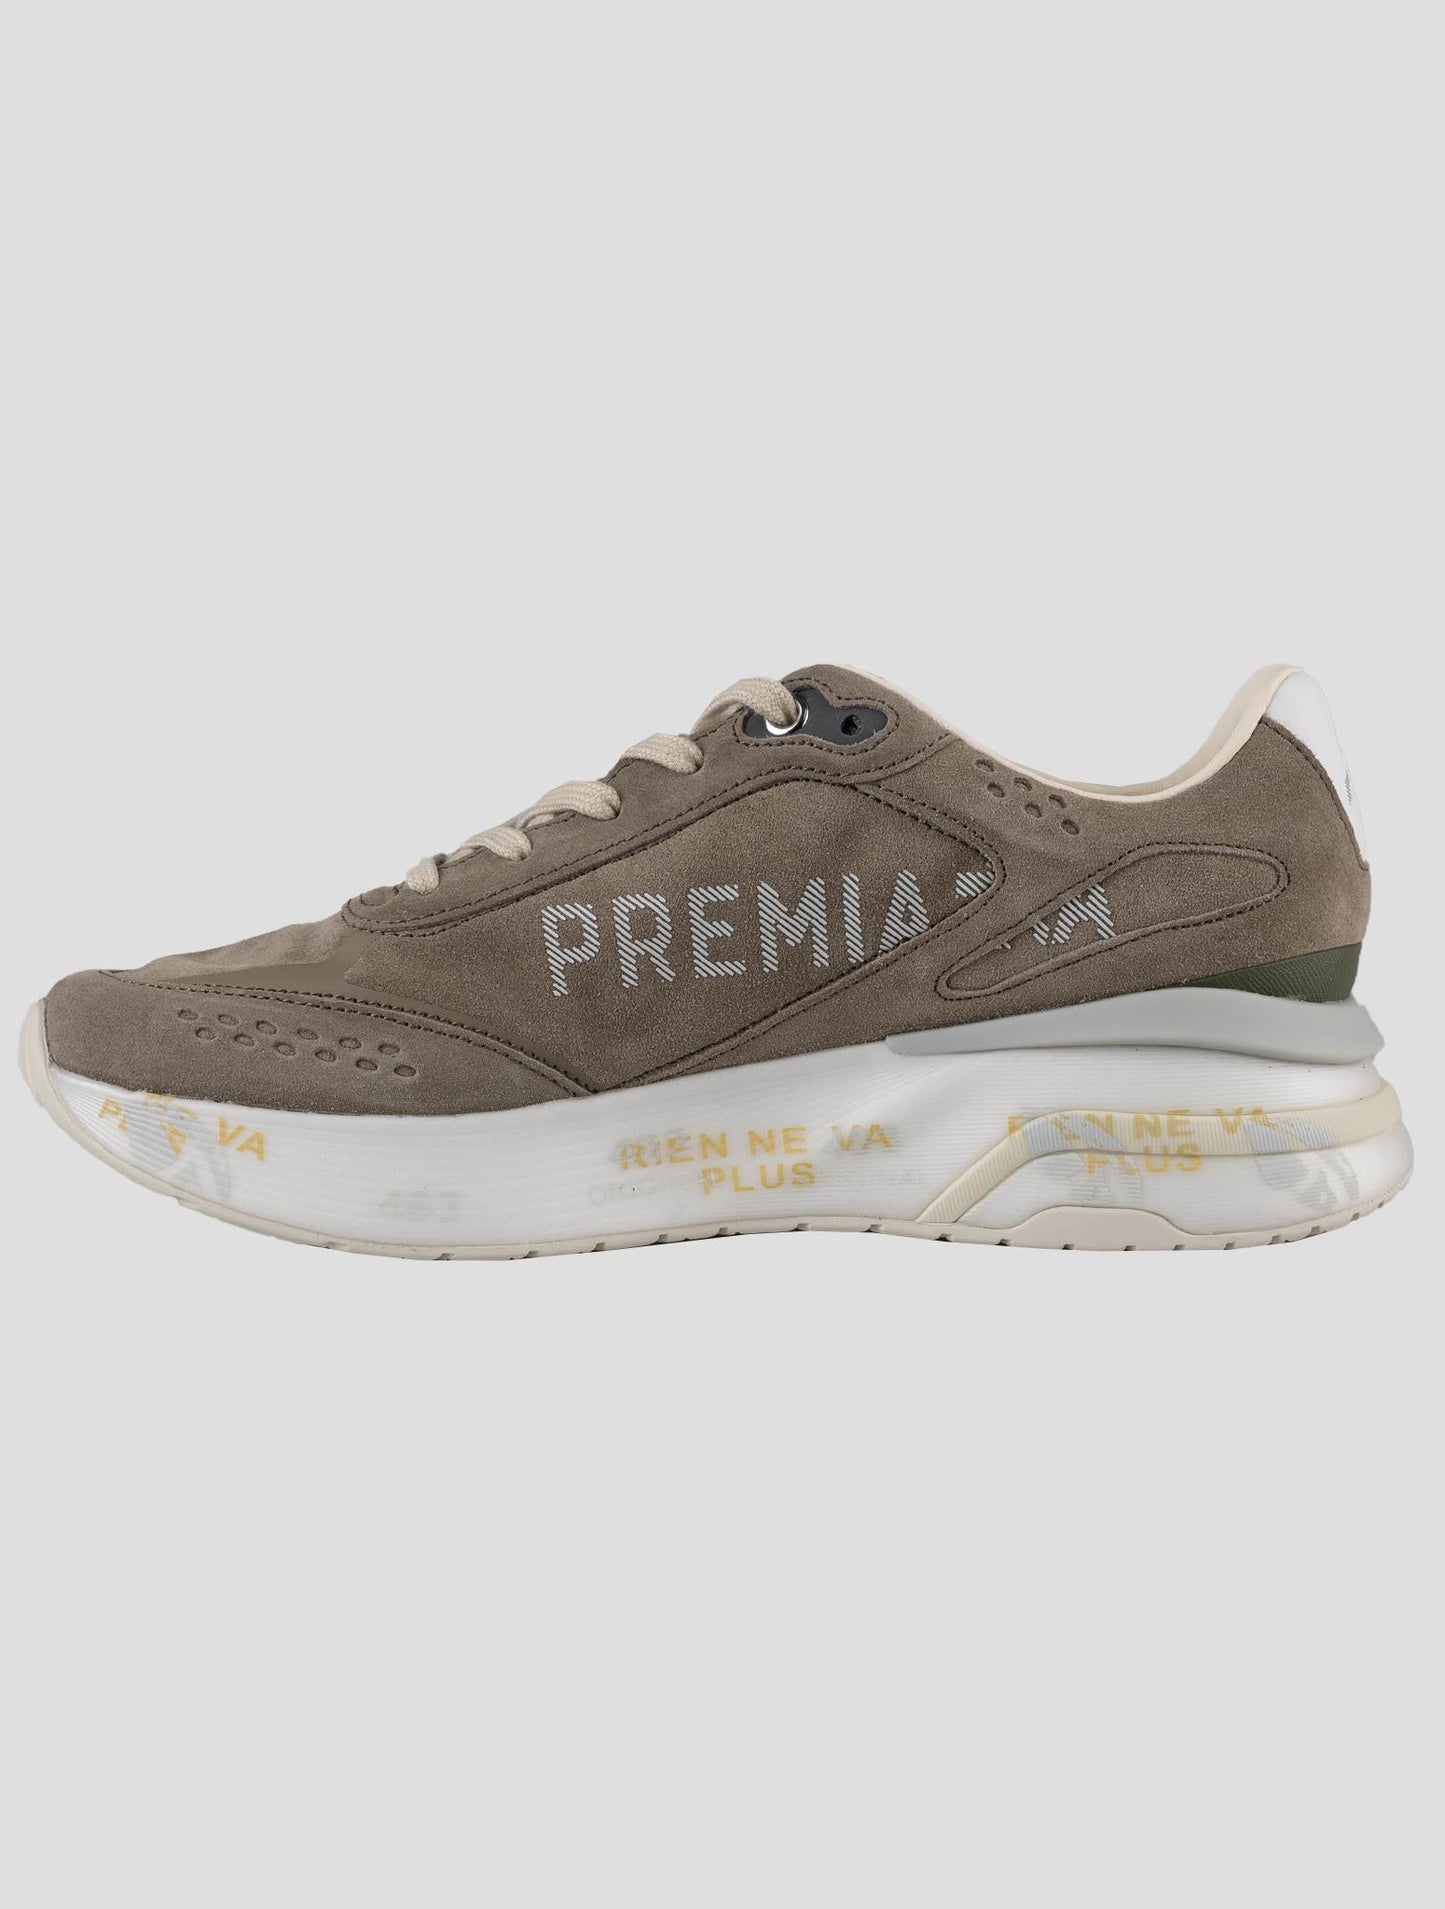 Premiata Brown Leather Suede Pa Sneakers